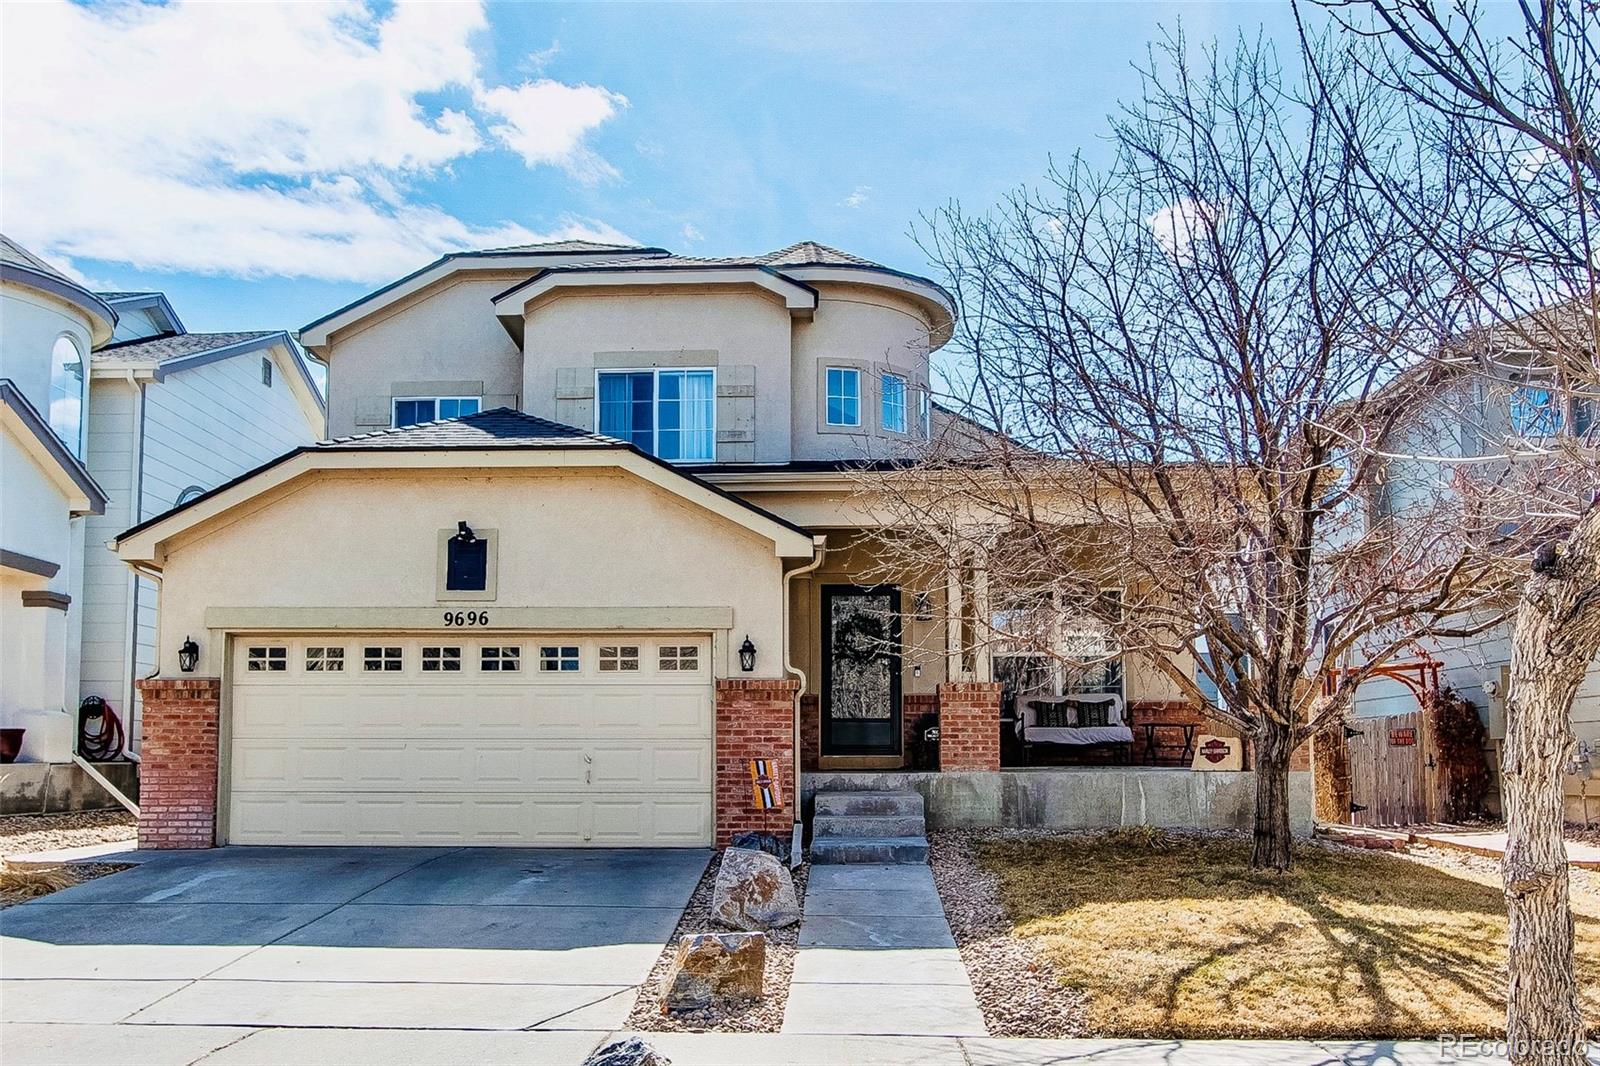 9696 E 112th Place, commerce city MLS: 6922672 Beds: 4 Baths: 4 Price: $578,900